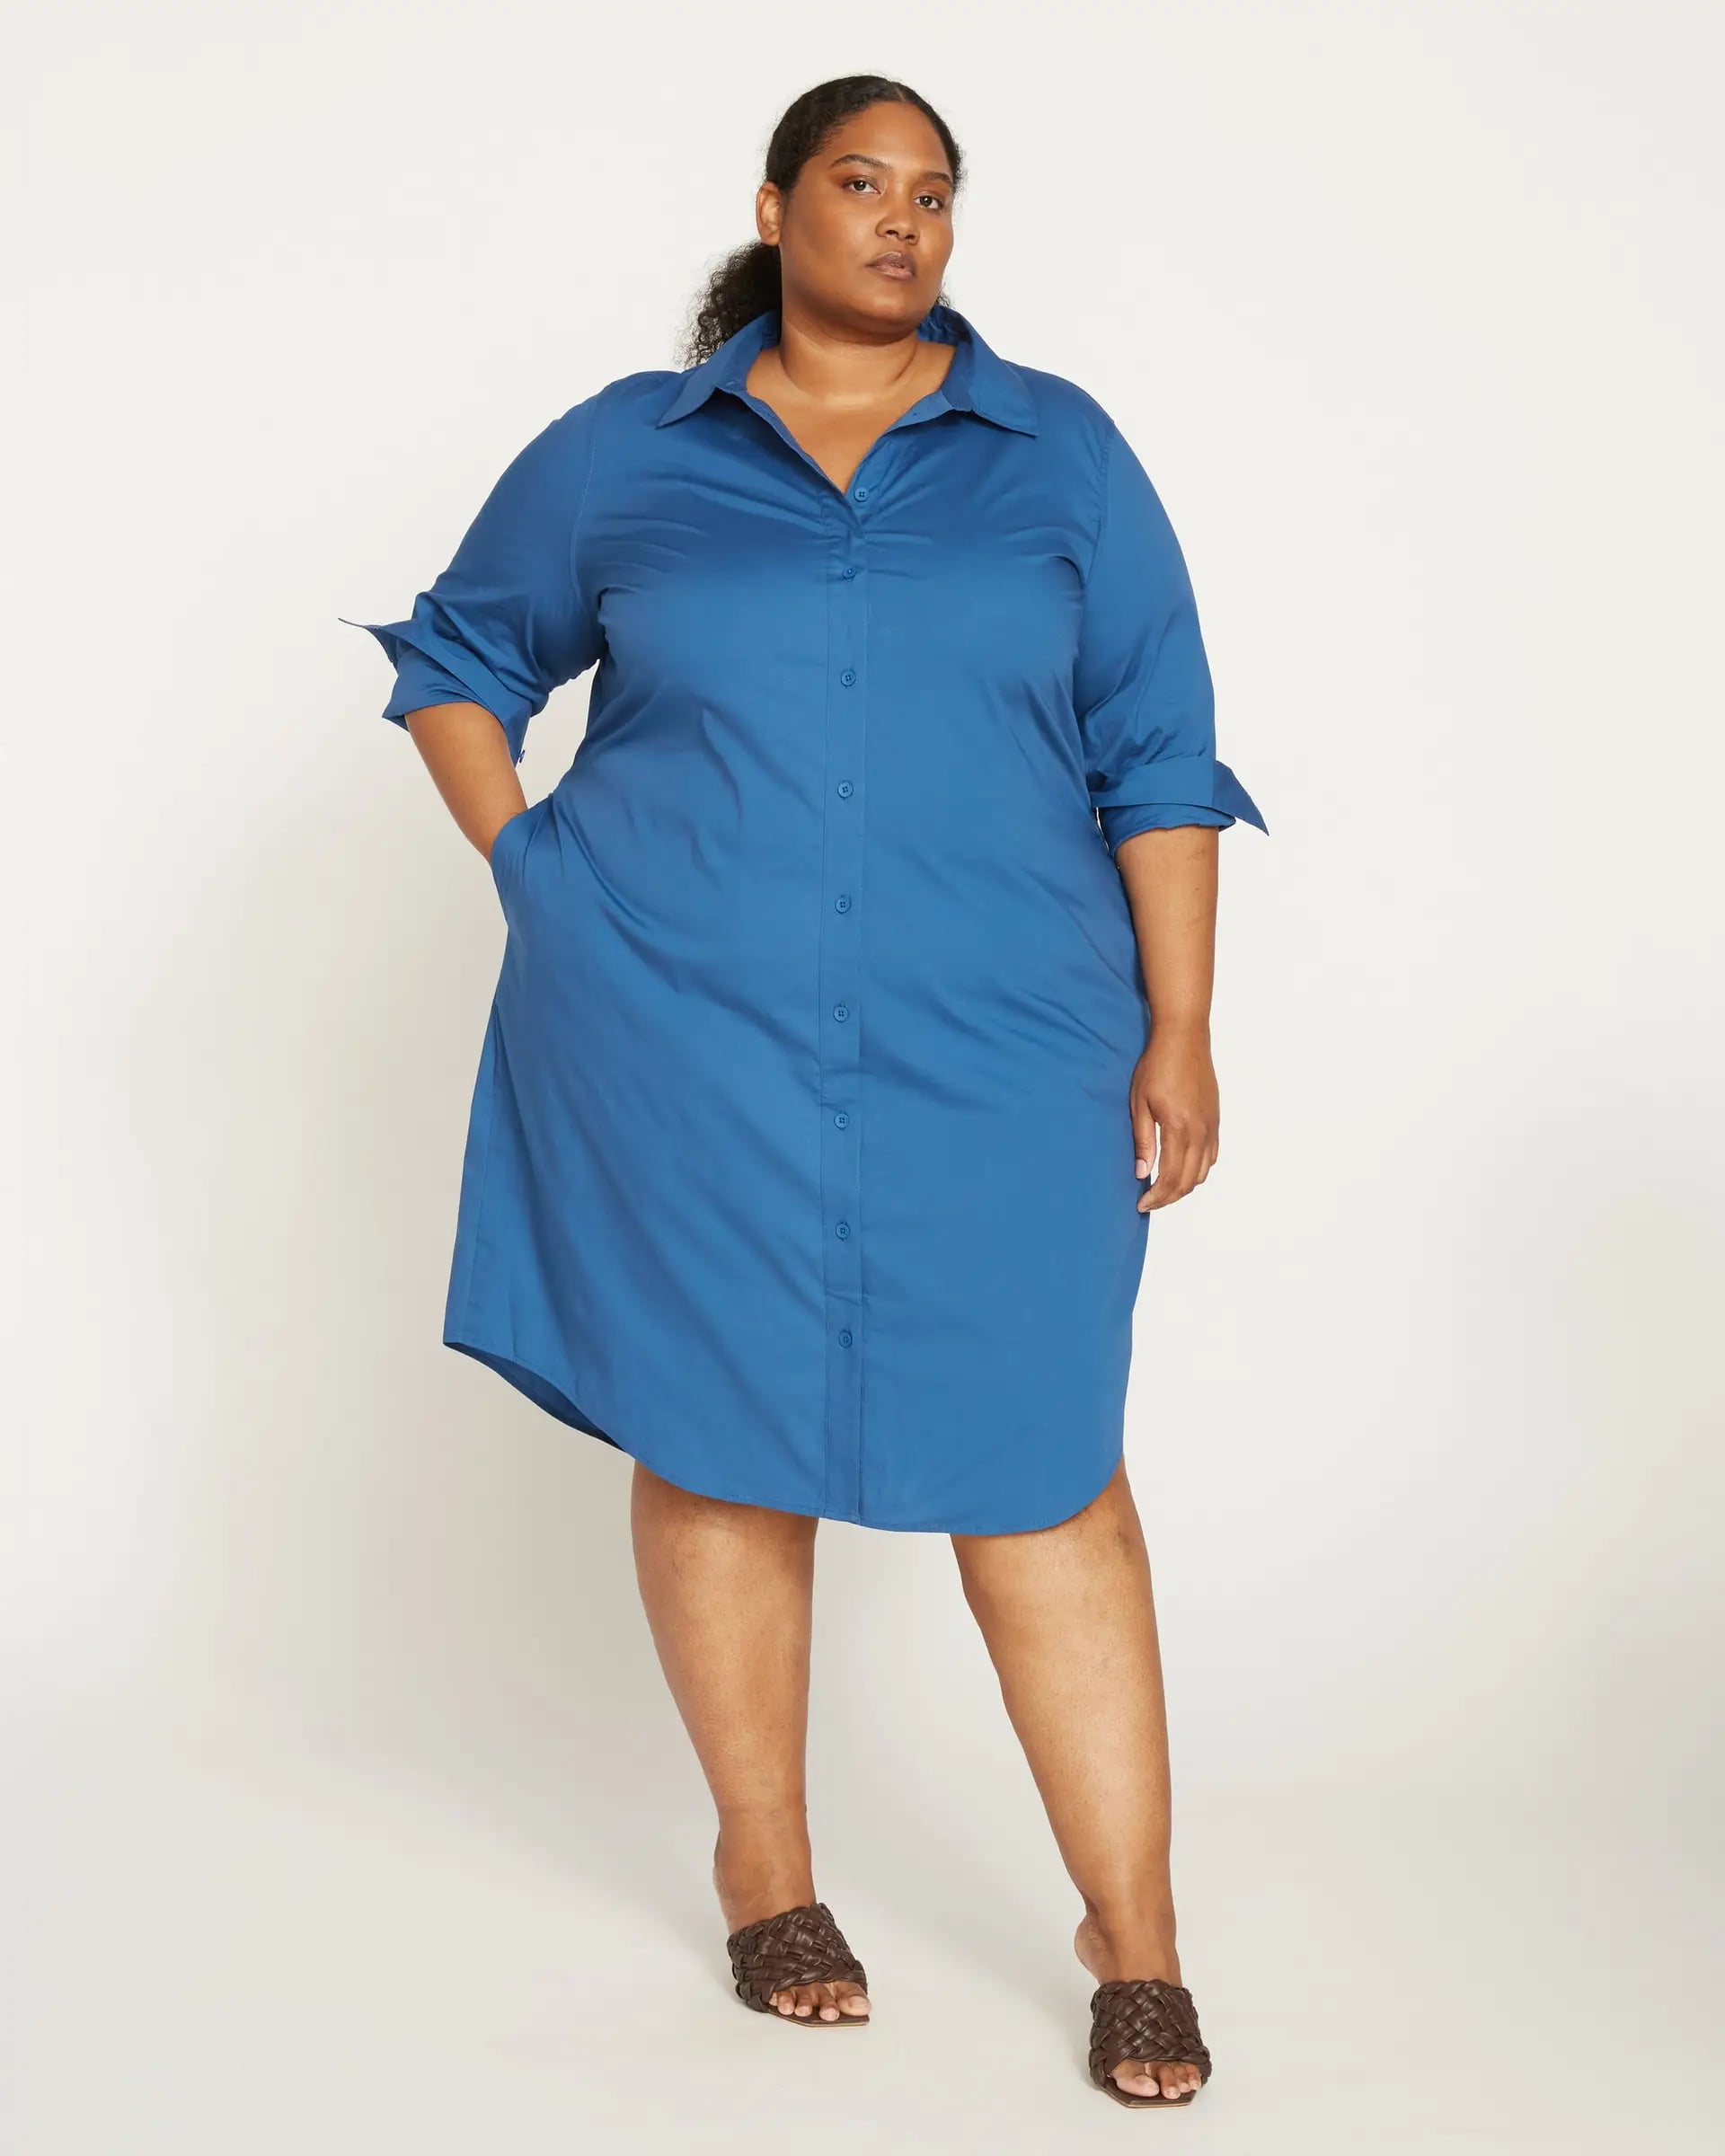  Plus Size Work Suits for Curvy Women High Fashion